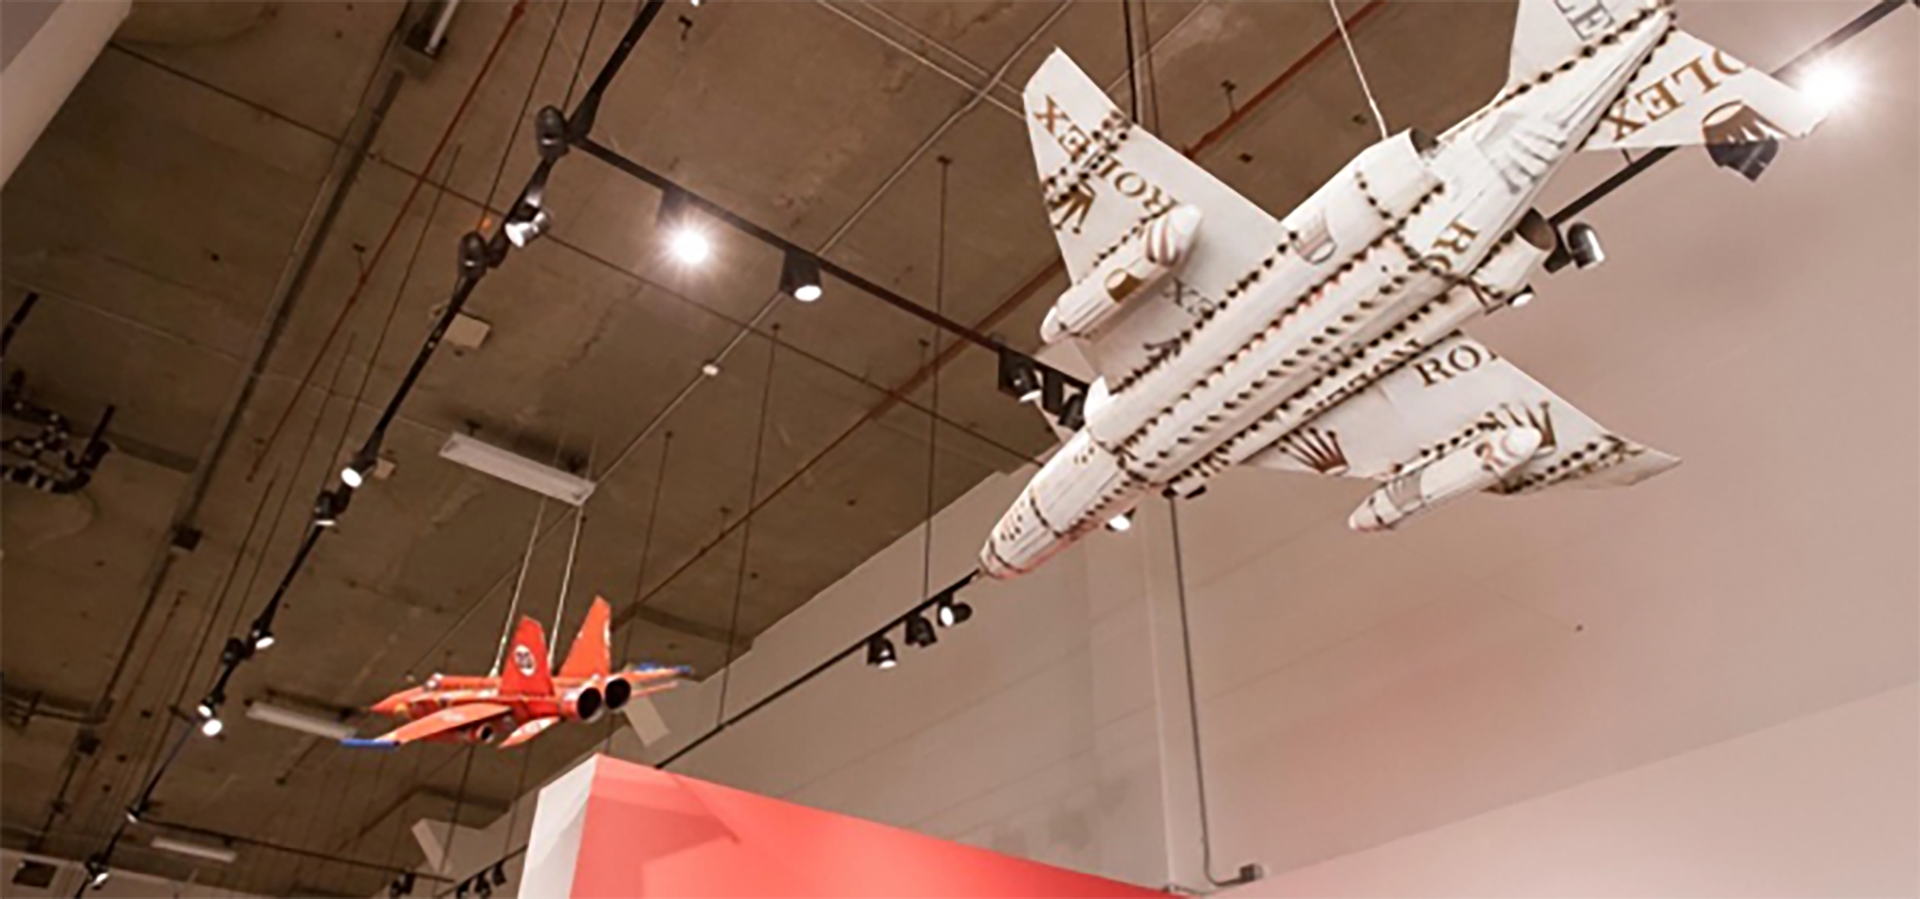 Model jets hanging from the ceiling